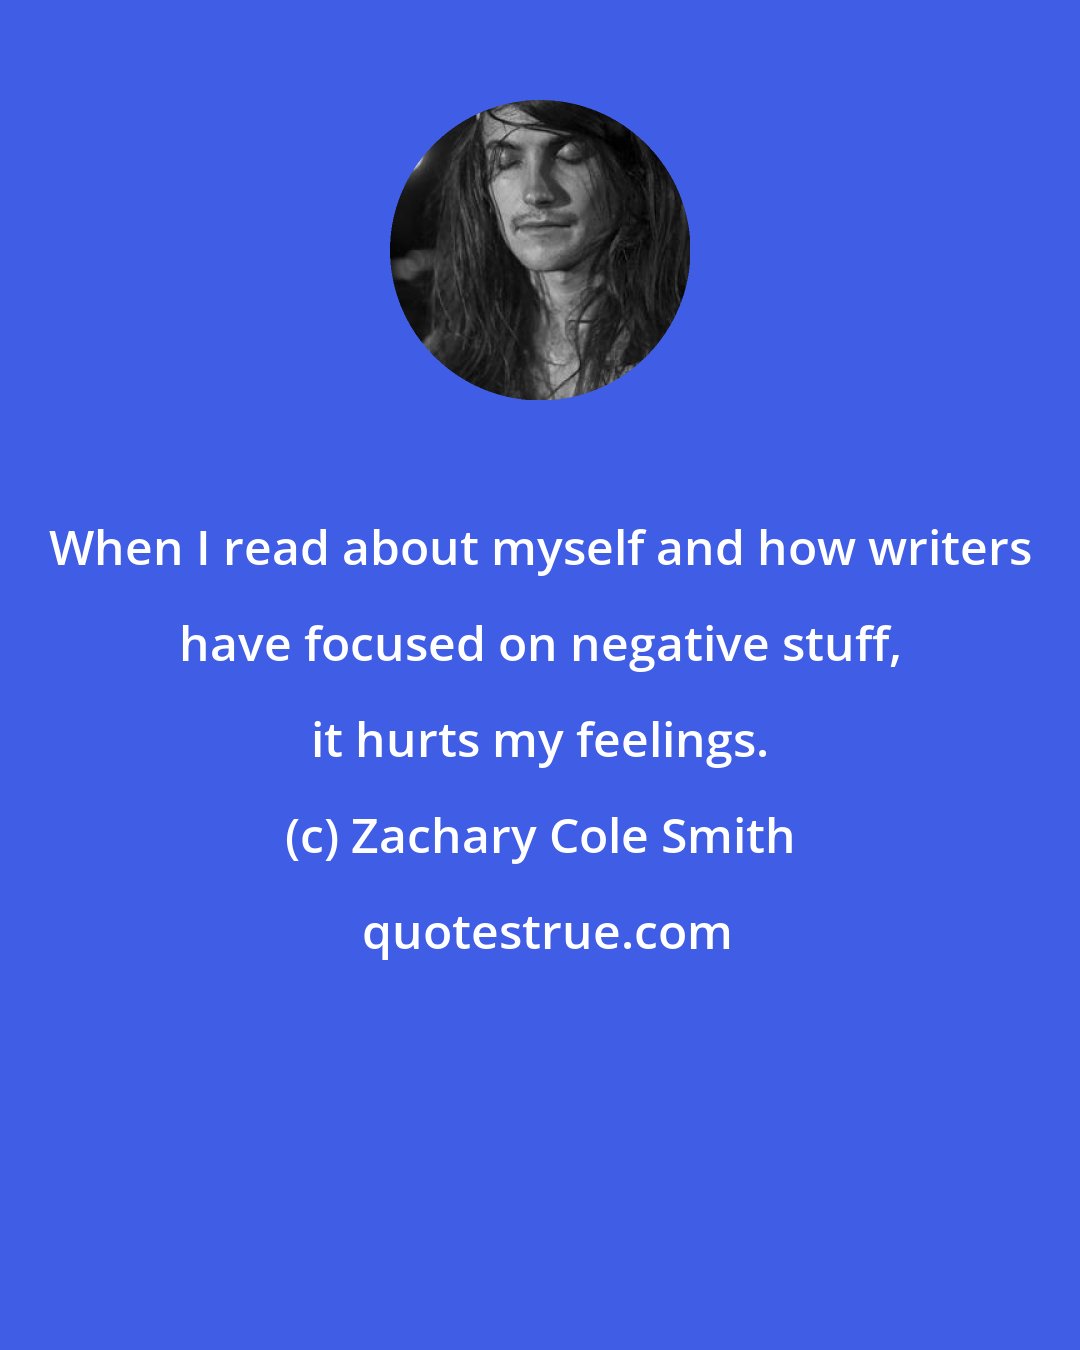 Zachary Cole Smith: When I read about myself and how writers have focused on negative stuff, it hurts my feelings.